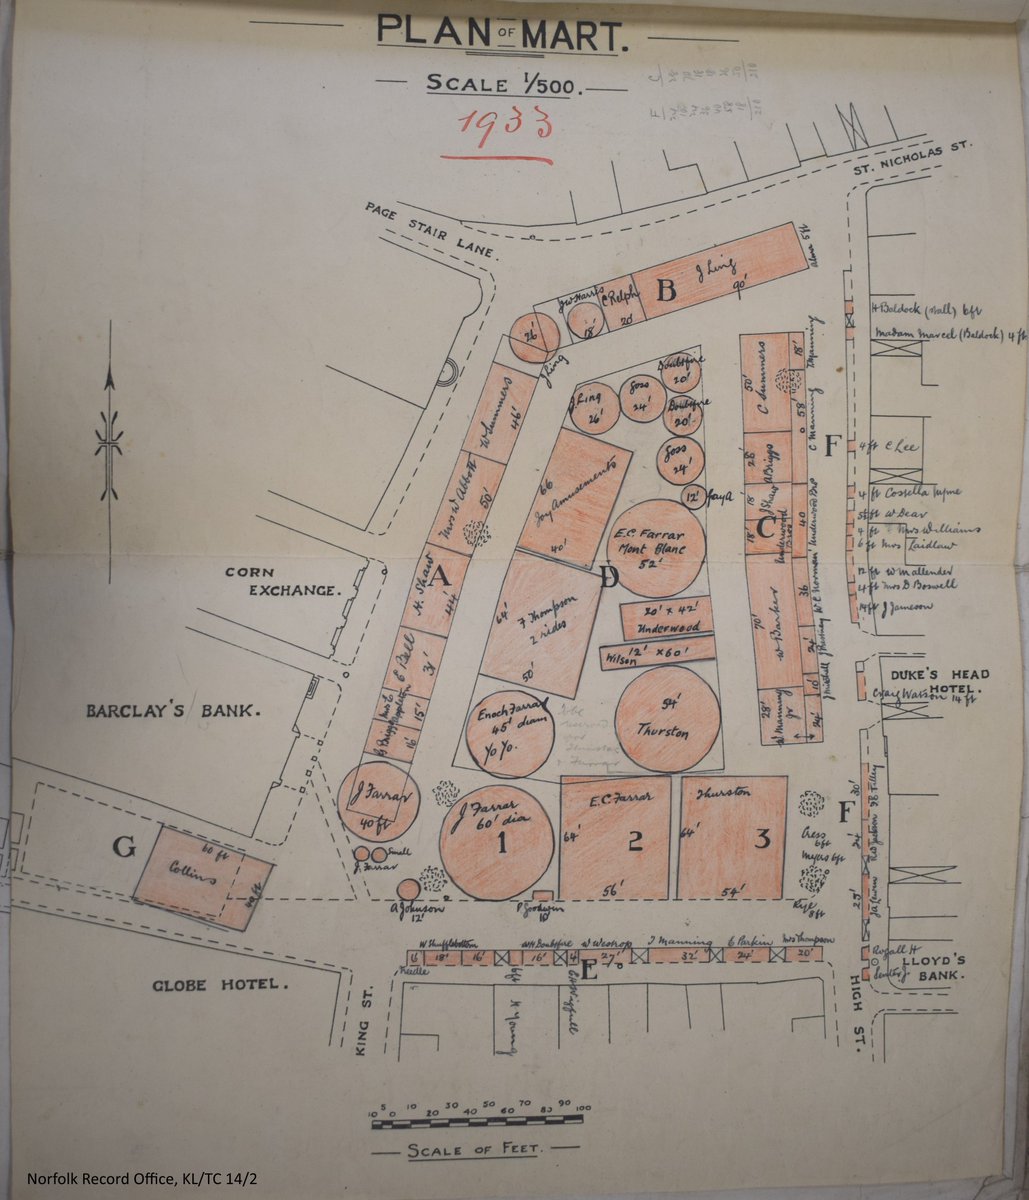 This plan shows how spaces were allocated for the Mart of 1933. Each plot gives the name of the displayer and the size of the area they have to set their rides up @NorfolkRO